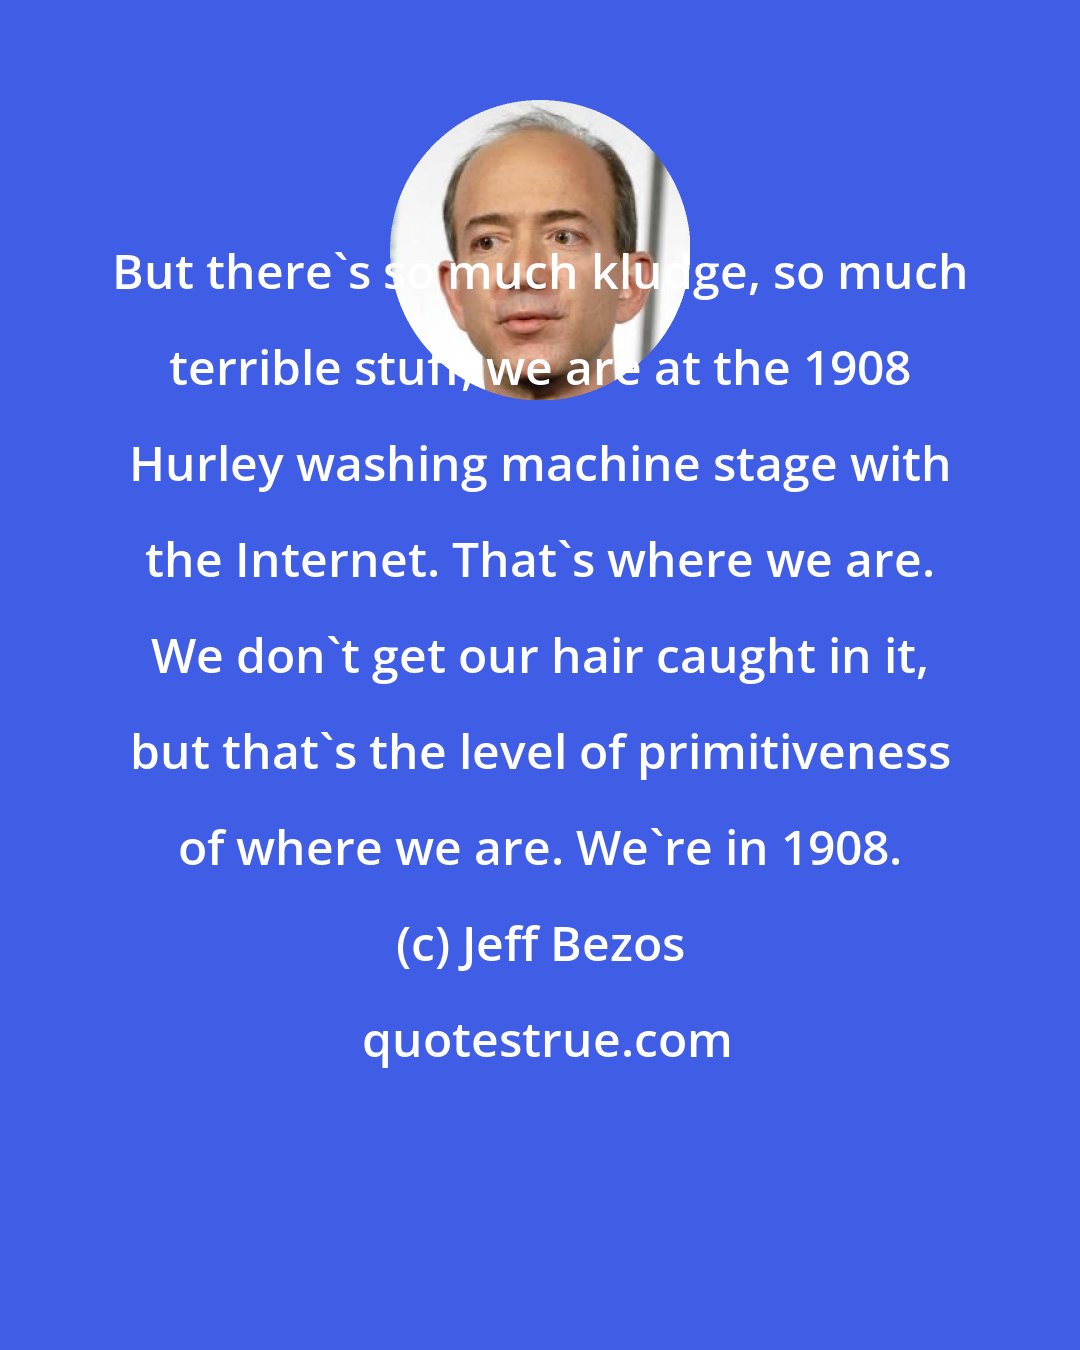 Jeff Bezos: But there's so much kludge, so much terrible stuff, we are at the 1908 Hurley washing machine stage with the Internet. That's where we are. We don't get our hair caught in it, but that's the level of primitiveness of where we are. We're in 1908.